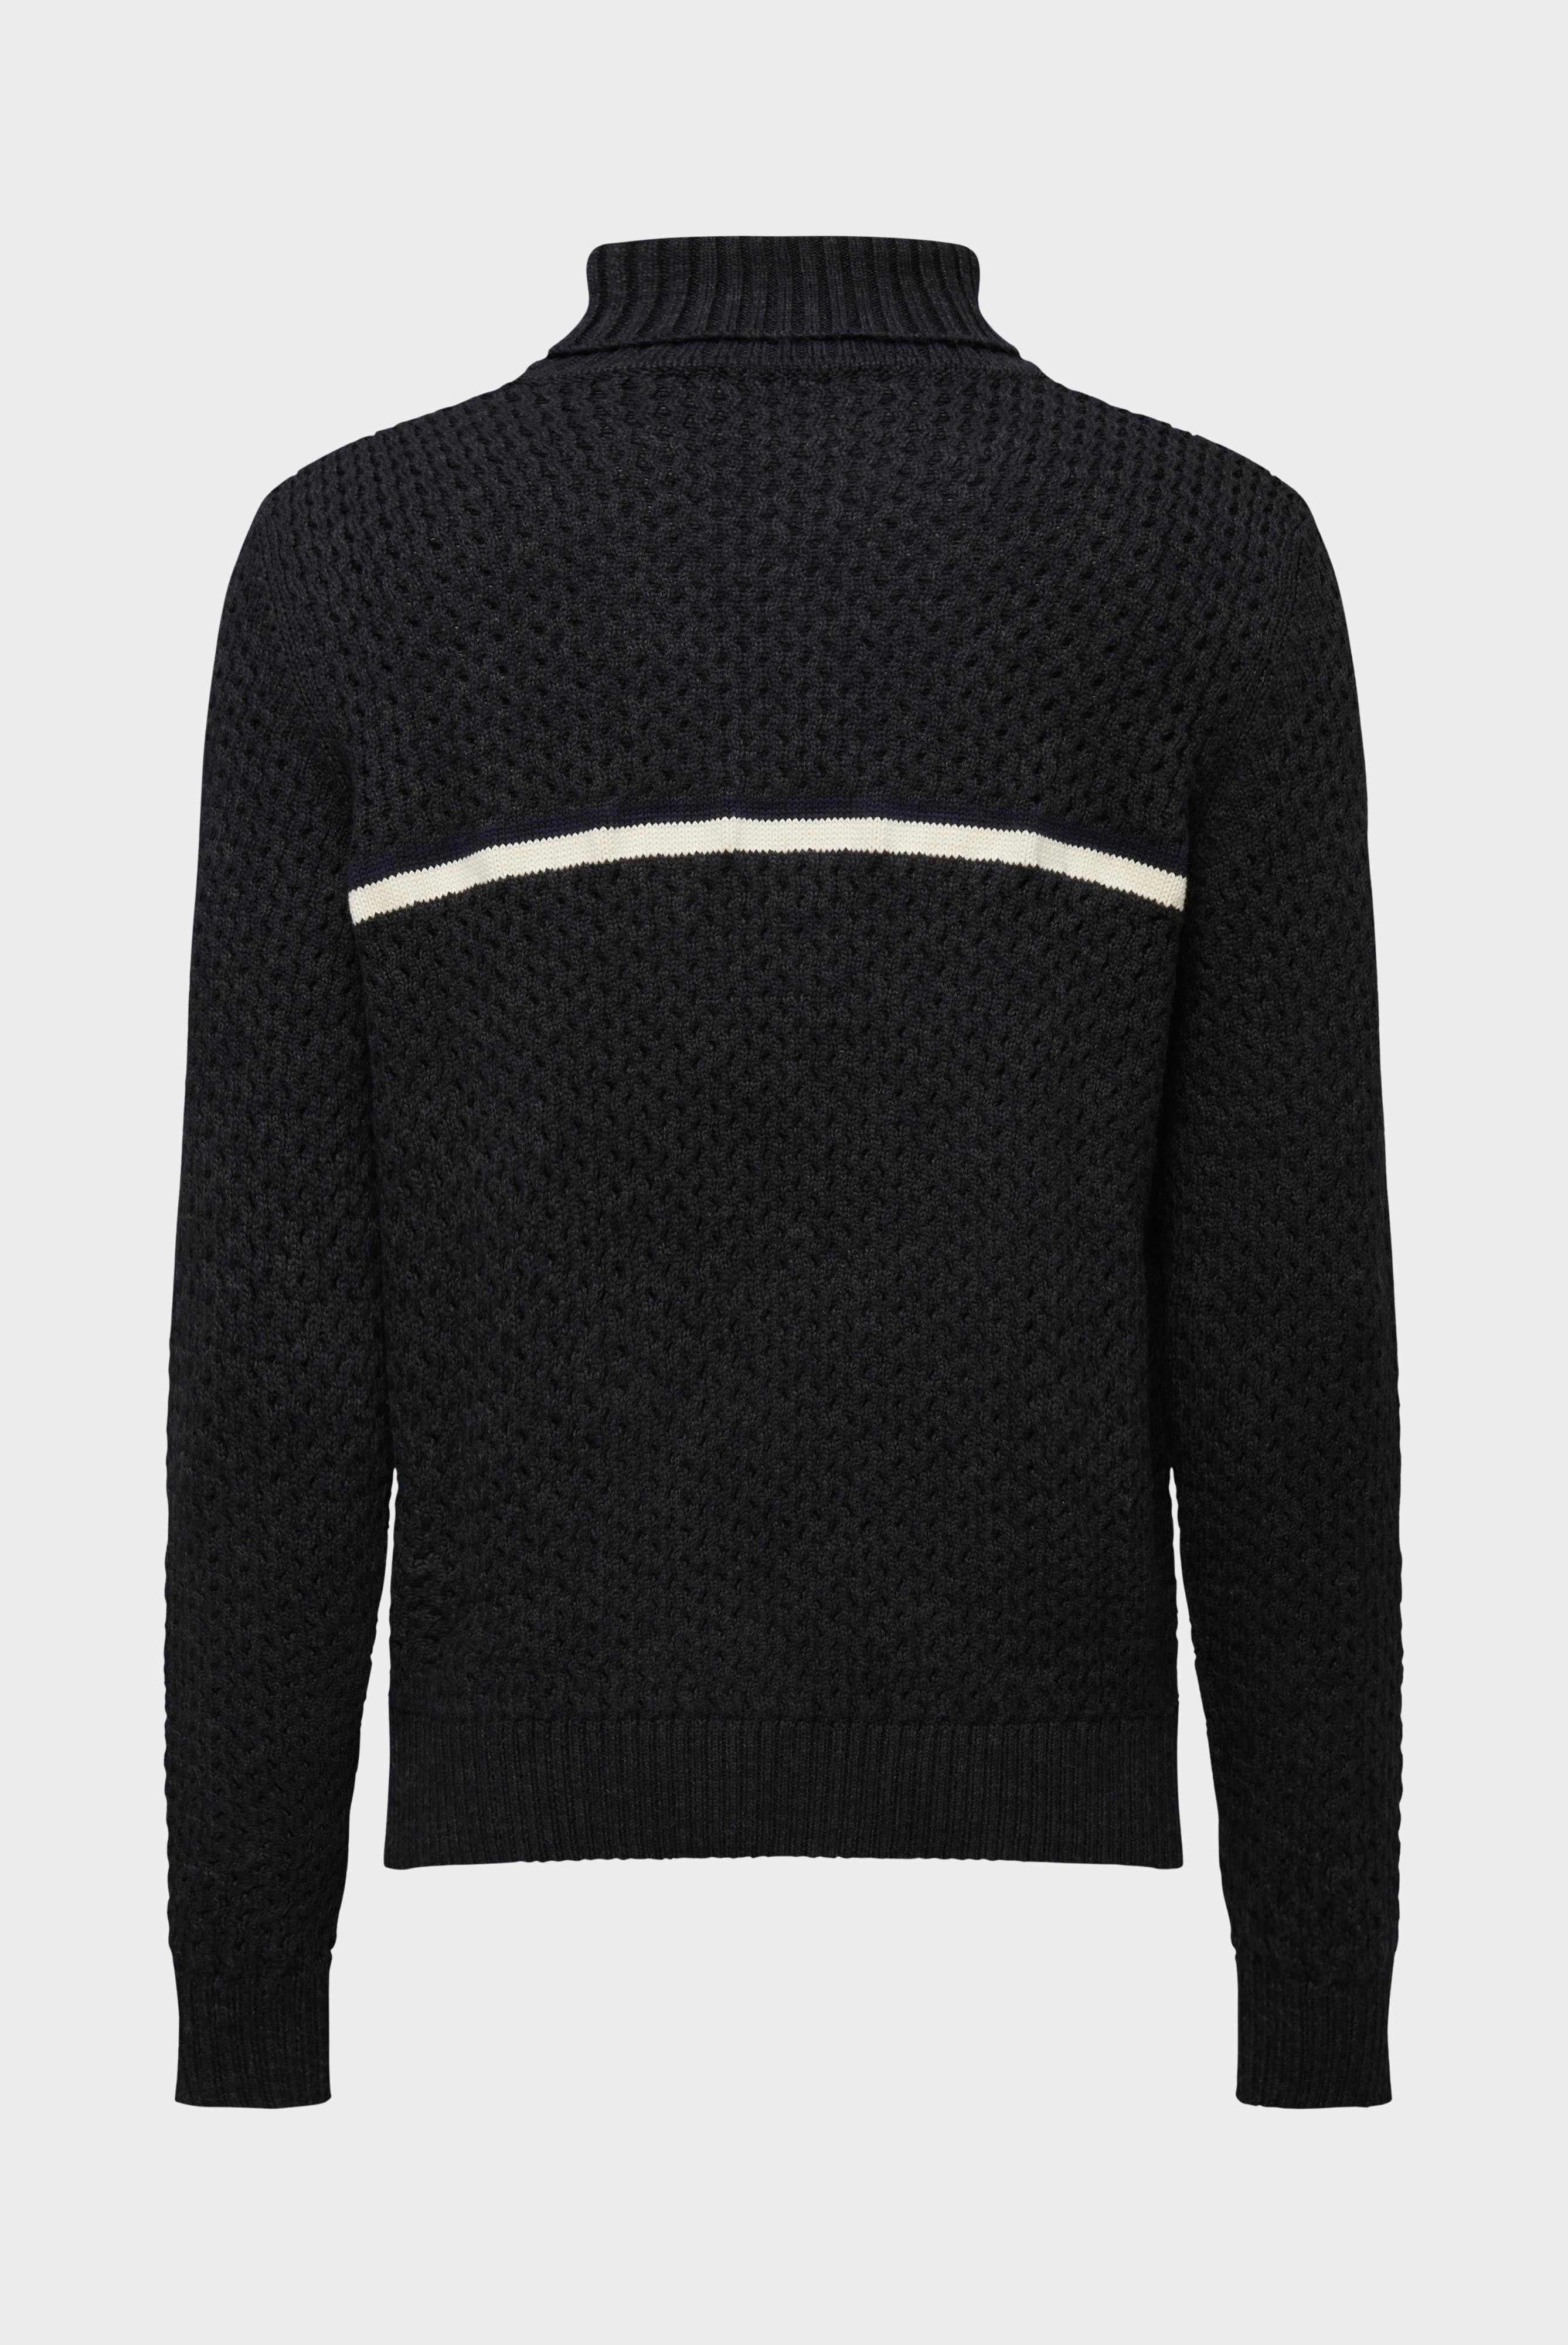 Sweaters & Cardigans+Turtleneck with Merino and Cotton+82.8631..S00241.097.M